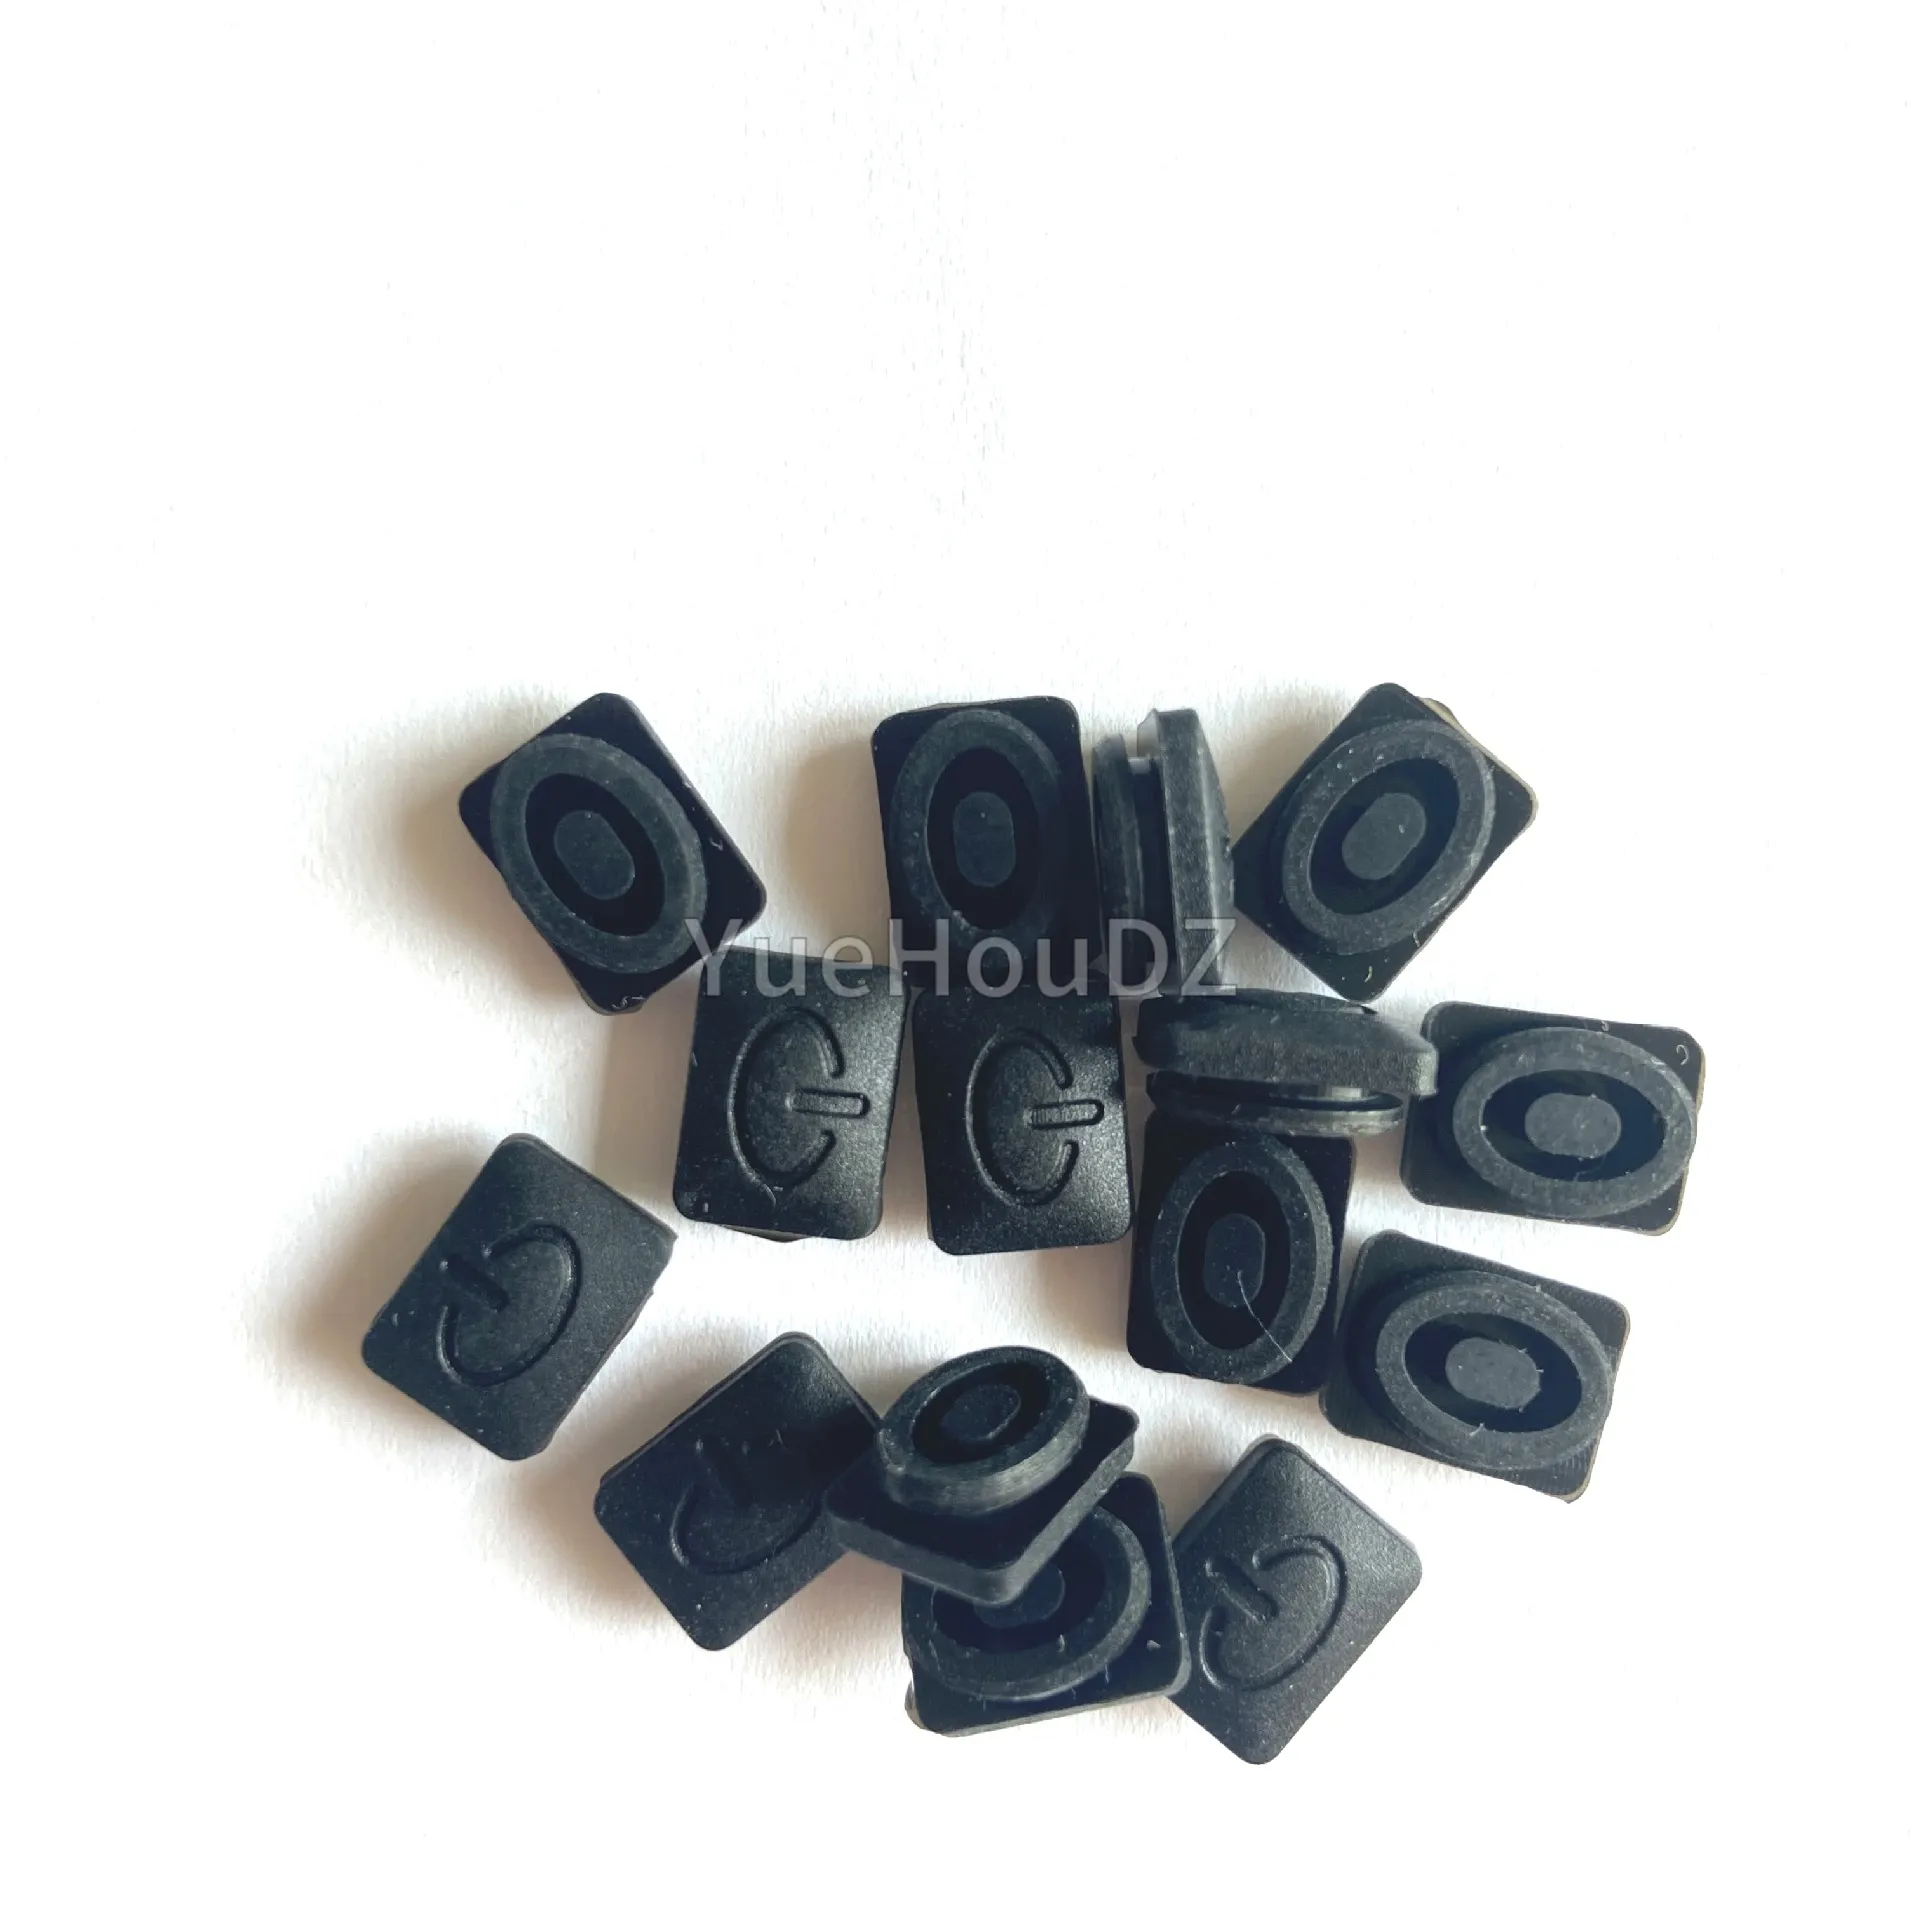 custom gamepad tester diy silicone rubber keypad controller rubber buttons manufacturer